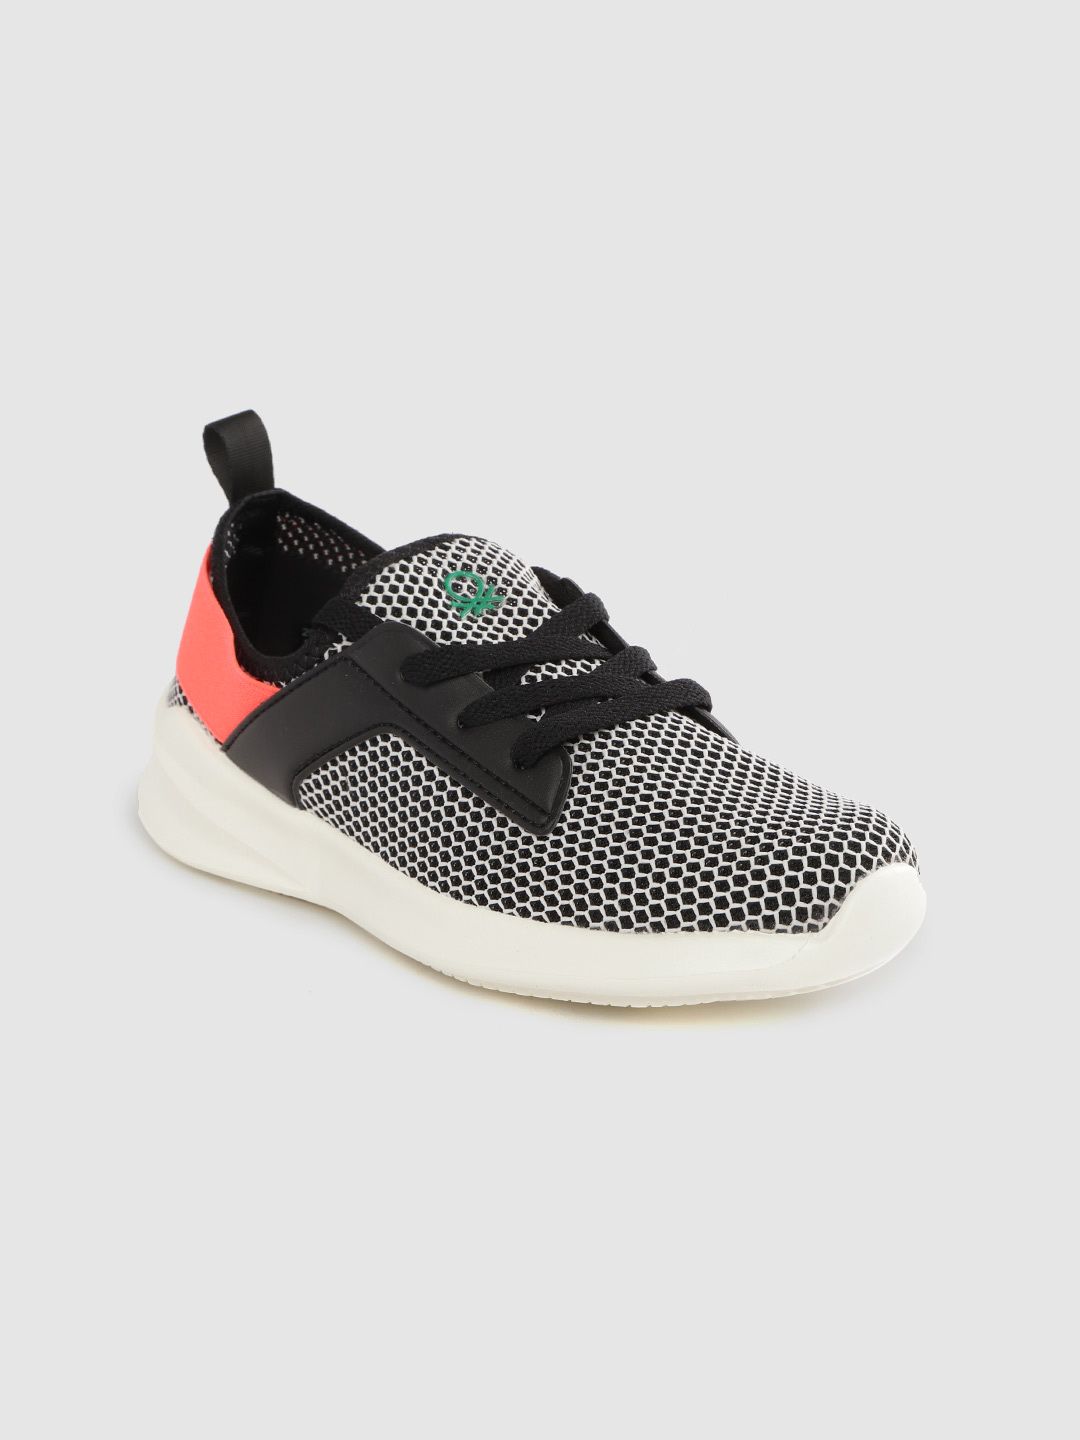 United Colors of Benetton Women Black & White Woven Design Sneakers Price in India